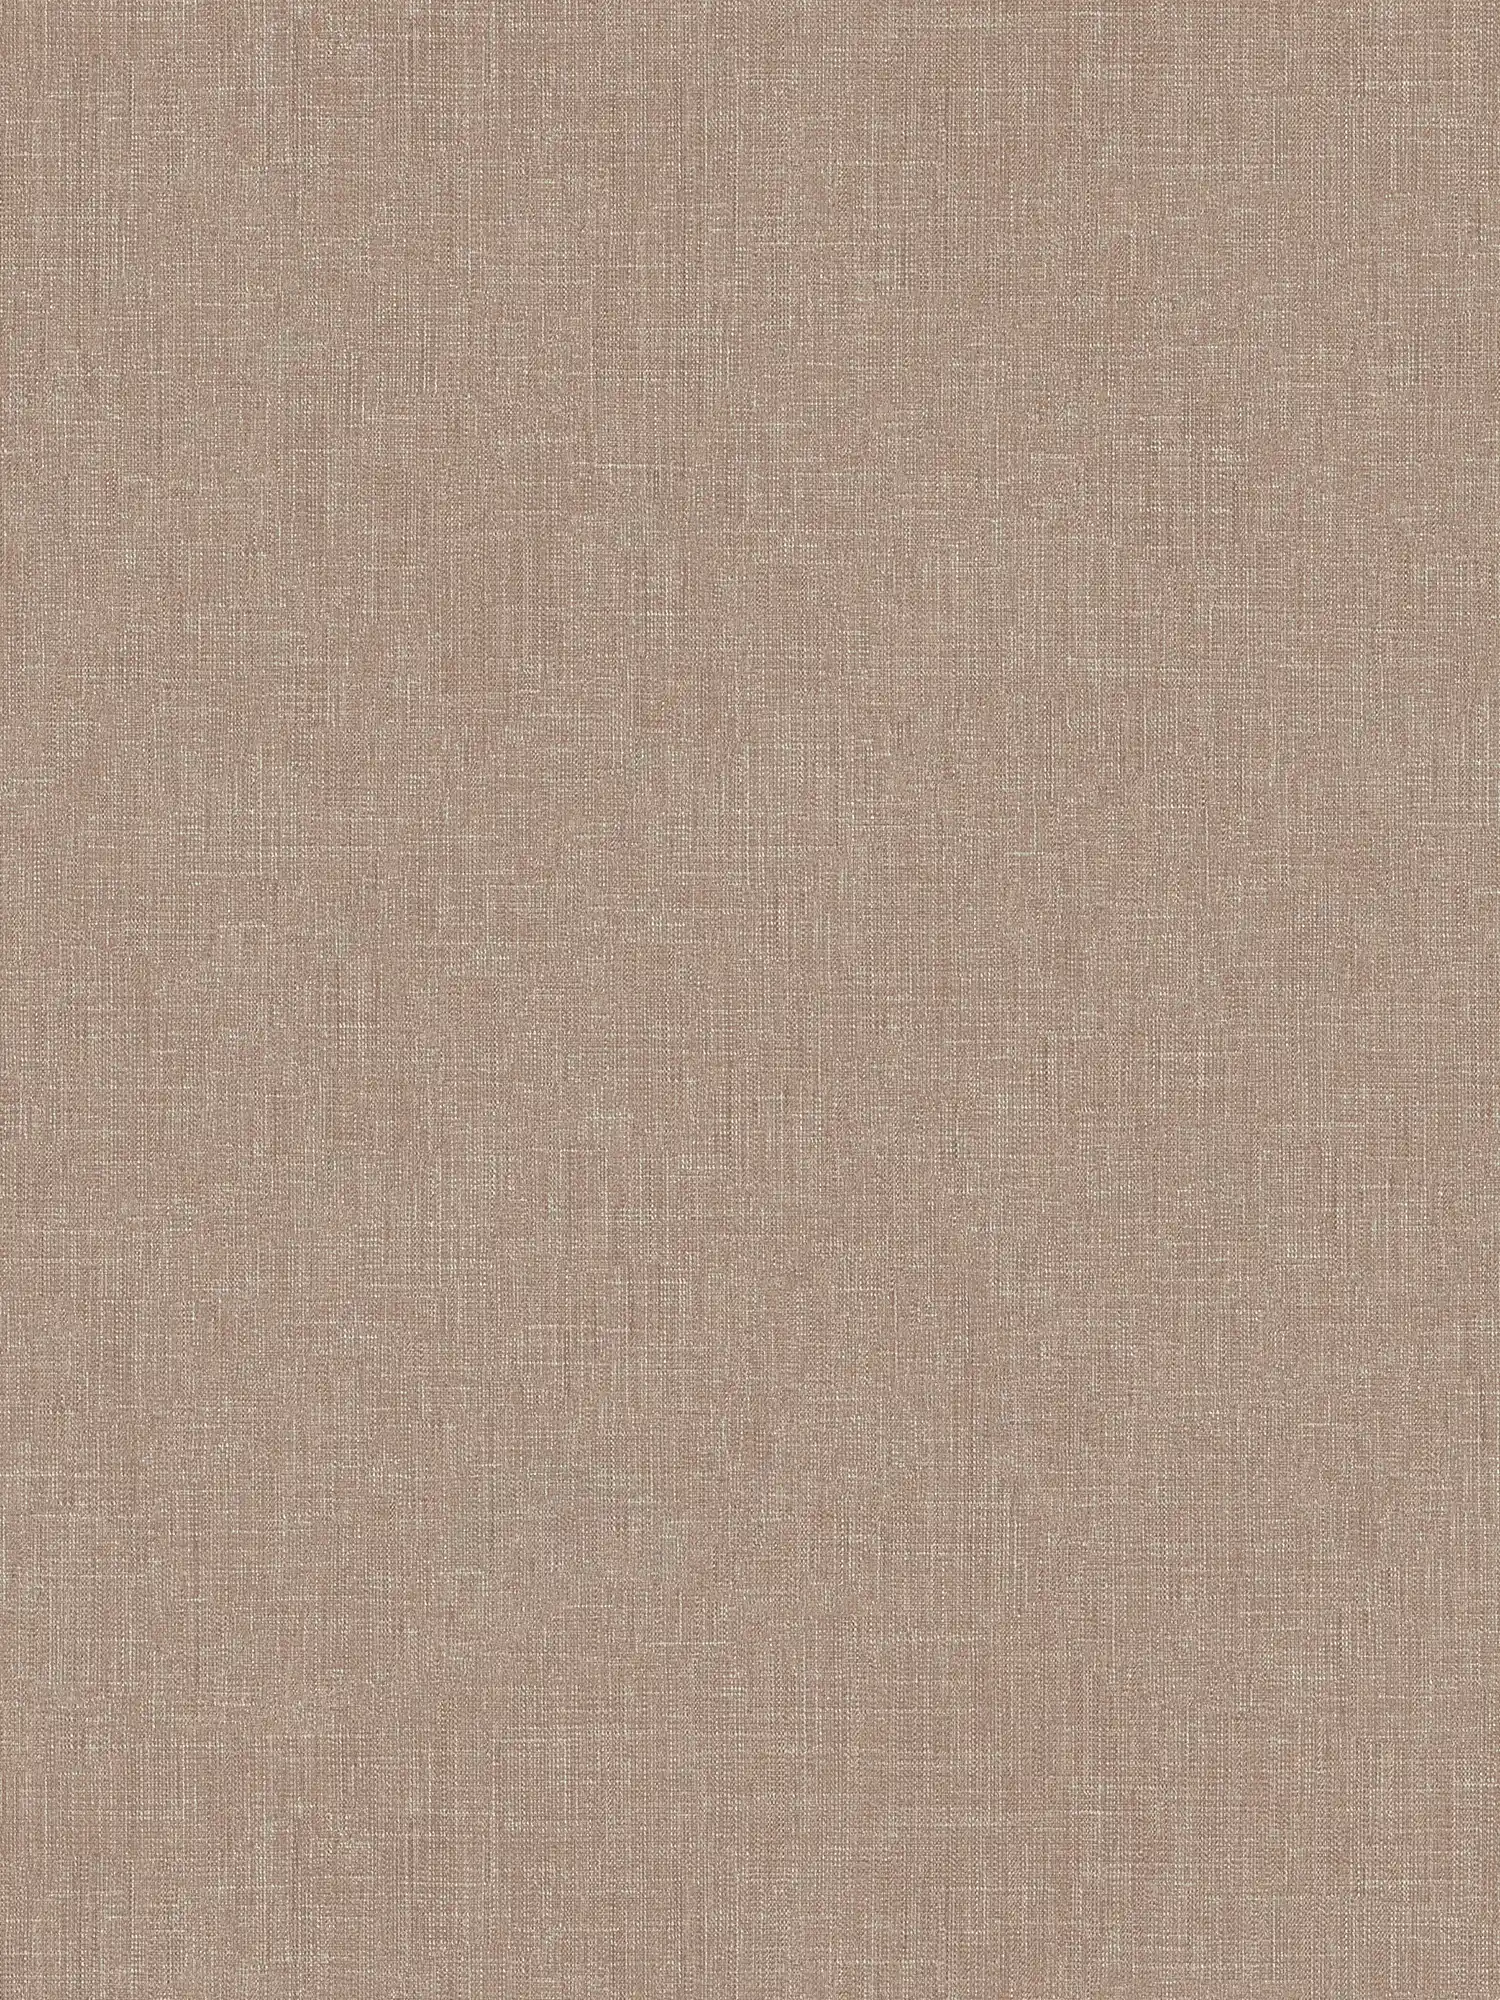 Linen optics wallpaper brown mottled with textile structure
